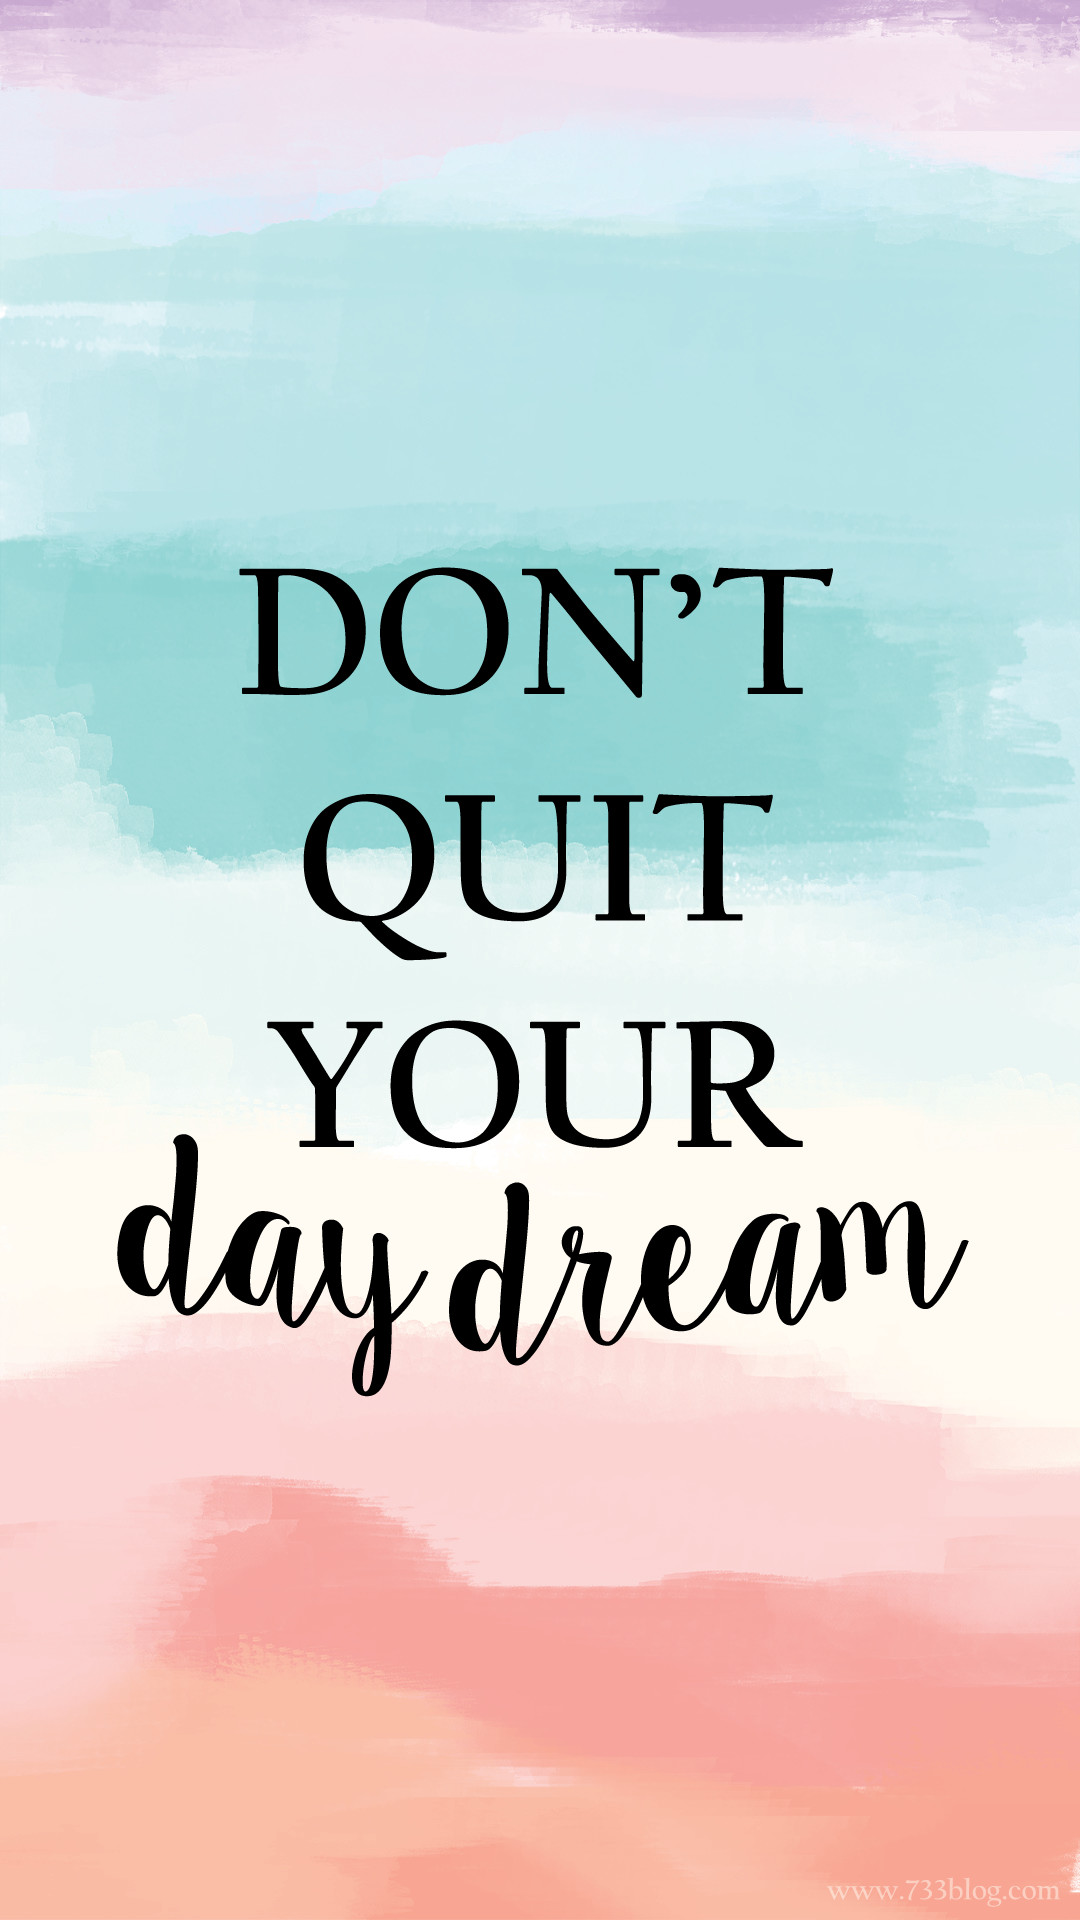 1080x1920 Don't Quit your Day Dream iPhone Wallpaper